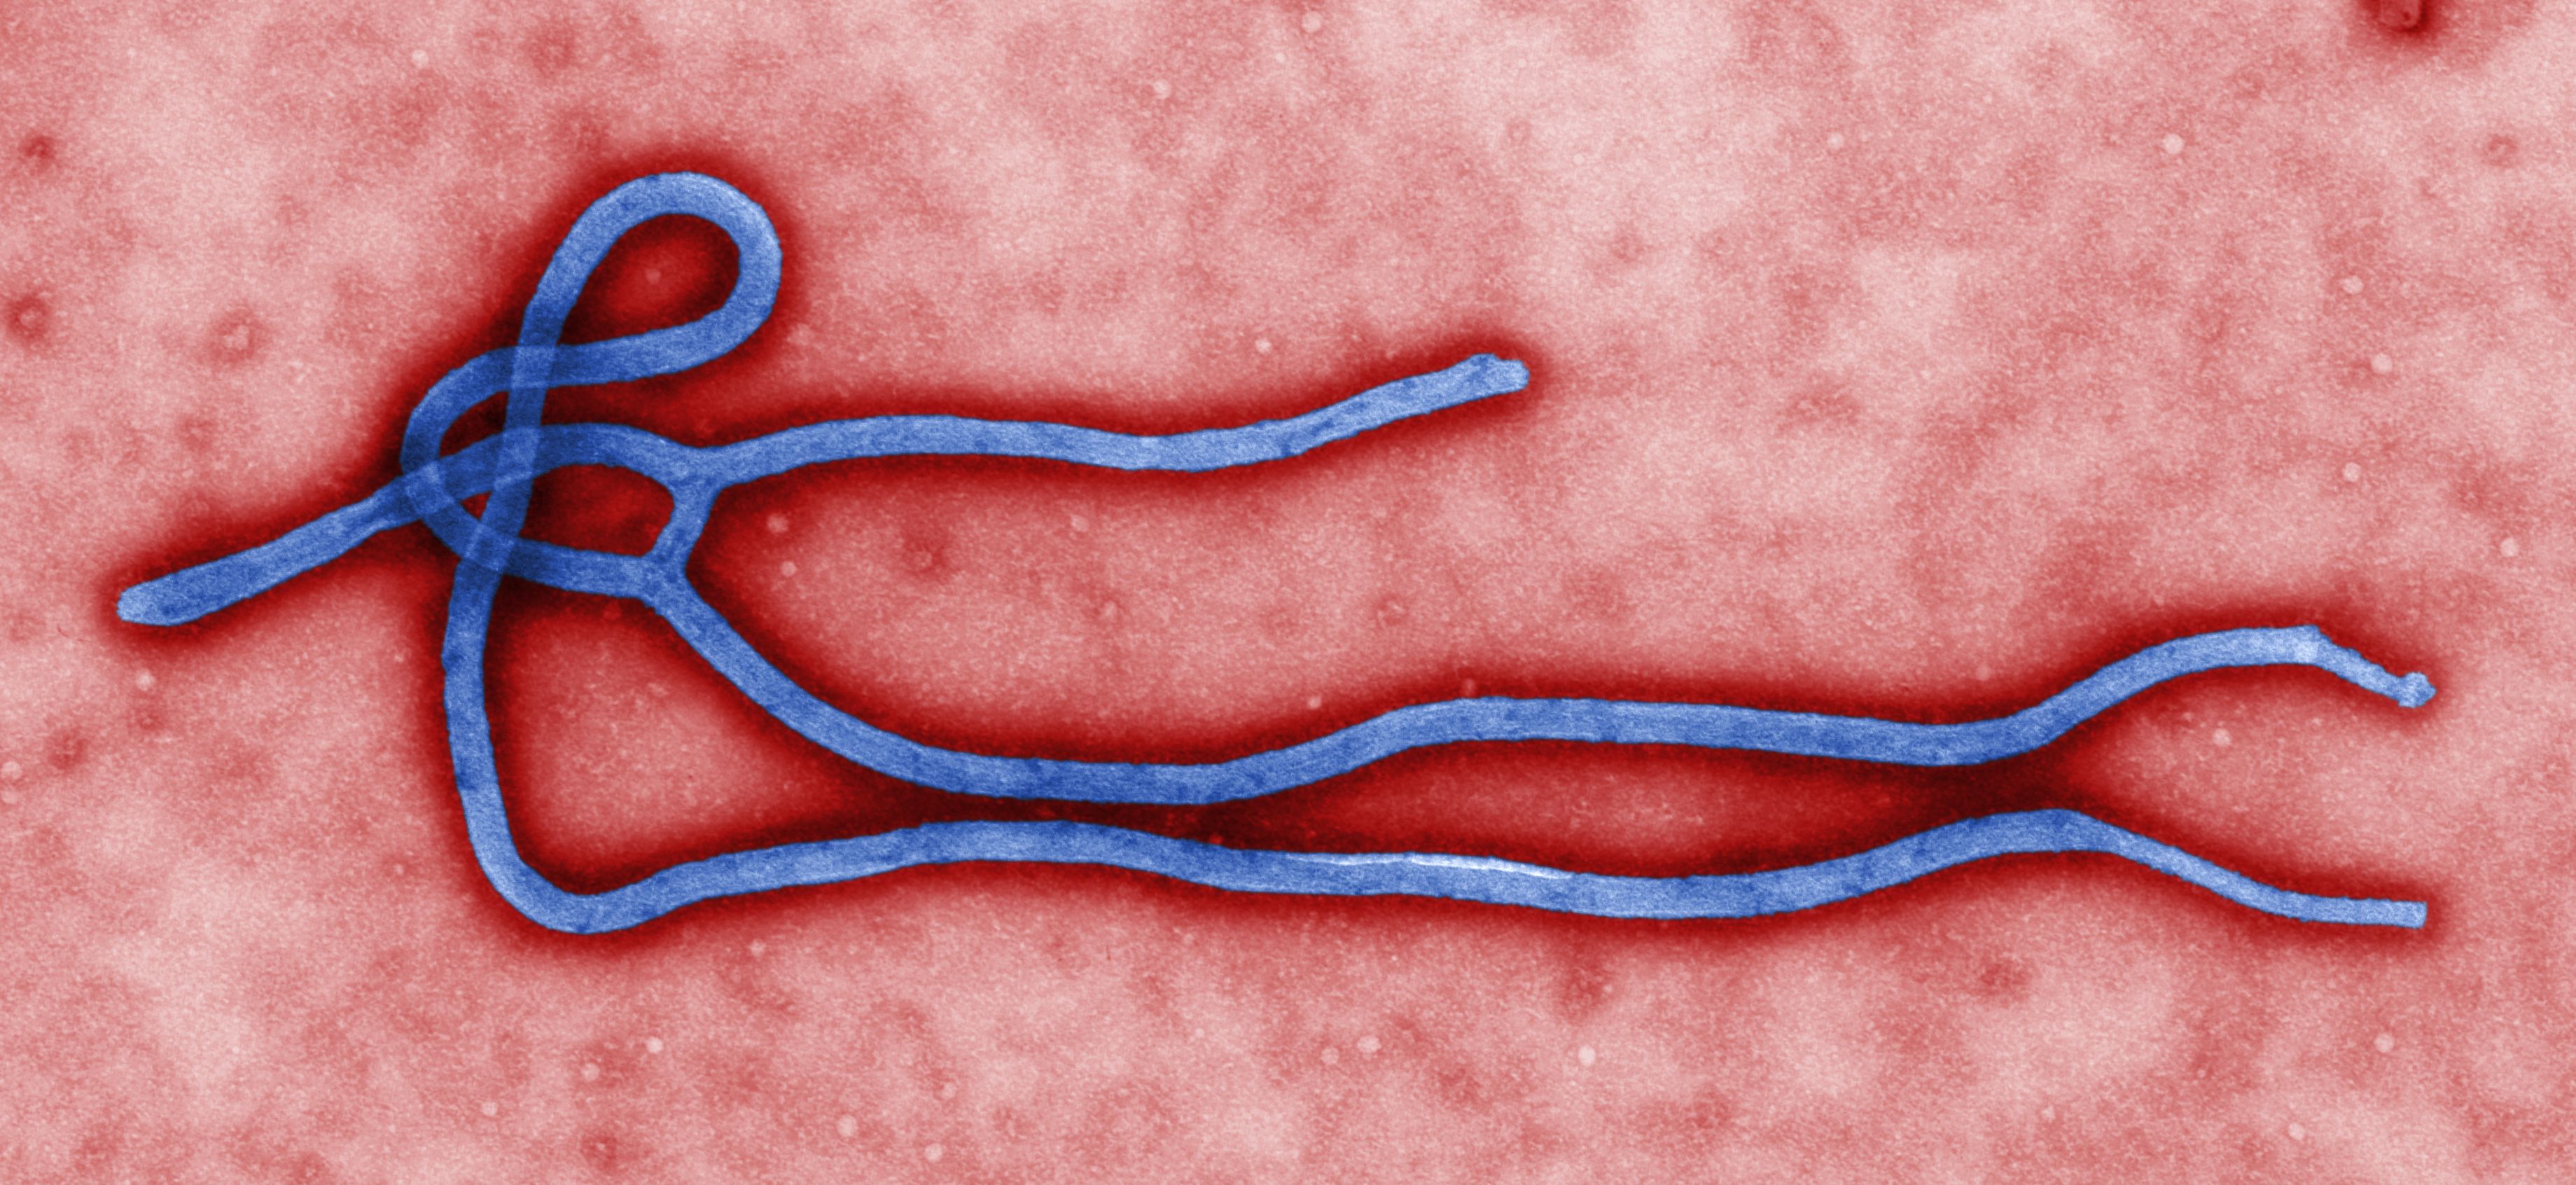 The ebola virus, one of the most dangerous virons.